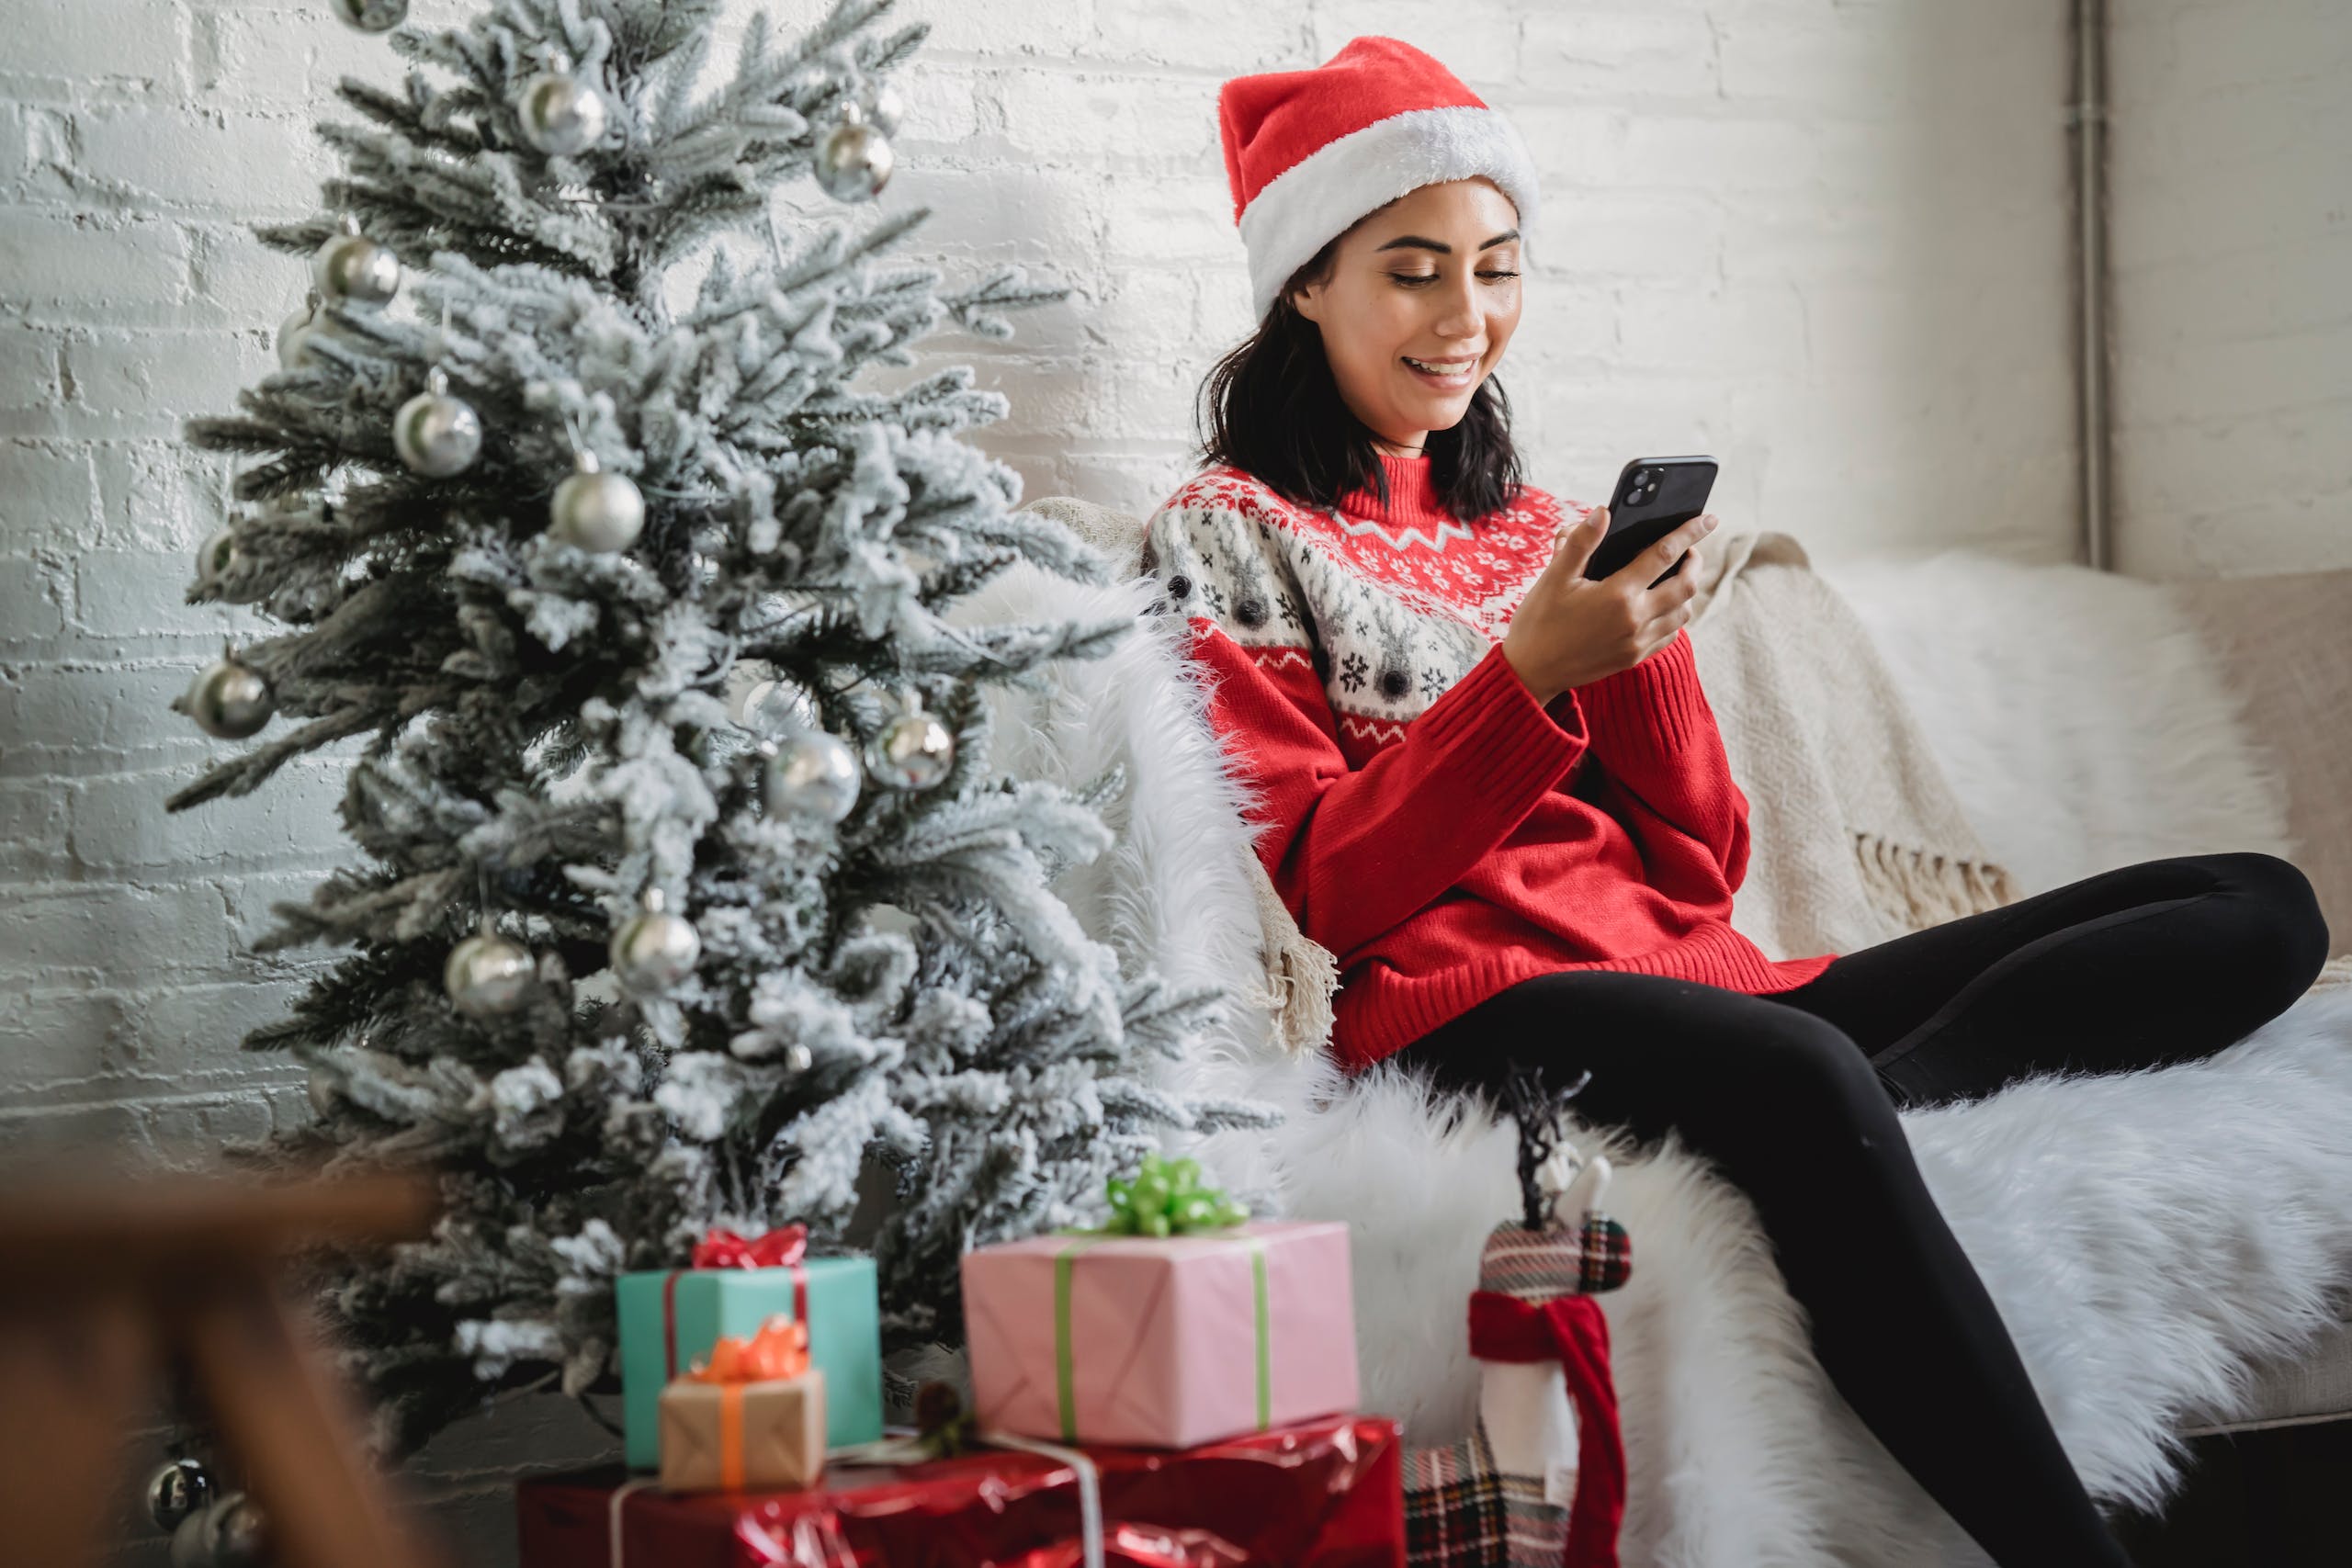 Give your Christmas digital marketing a creative touch with these tips